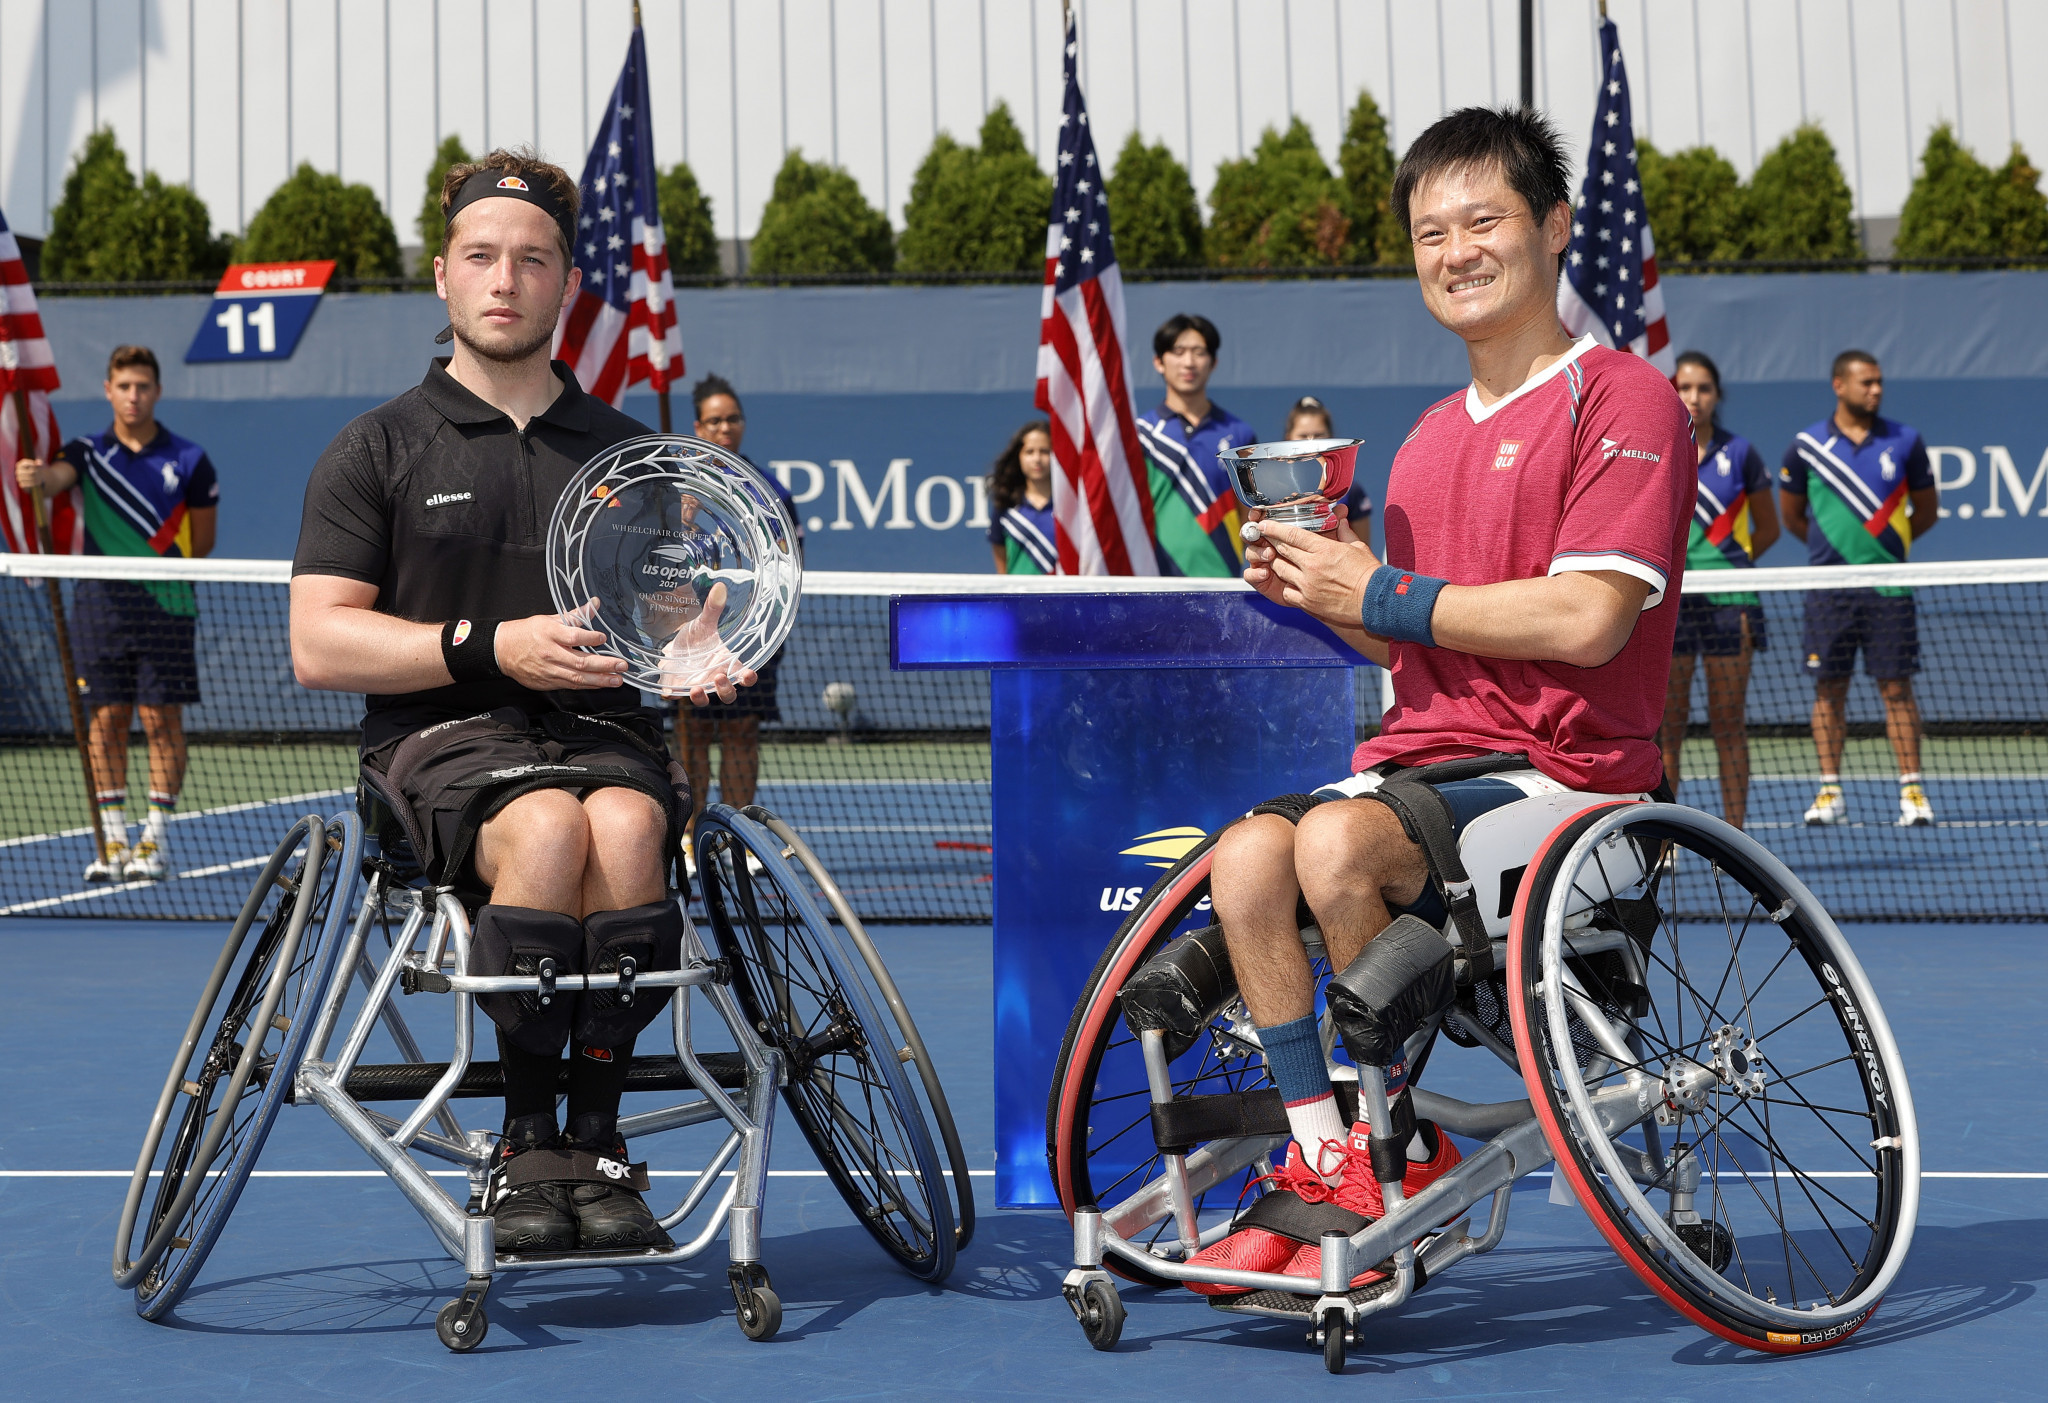 Alfie Hewett, left, and Shingo Kunieda, who contested last year's US Open men's wheelchair men's singles final, are set to be among a field of 16 players at this year's event ©Getty Images